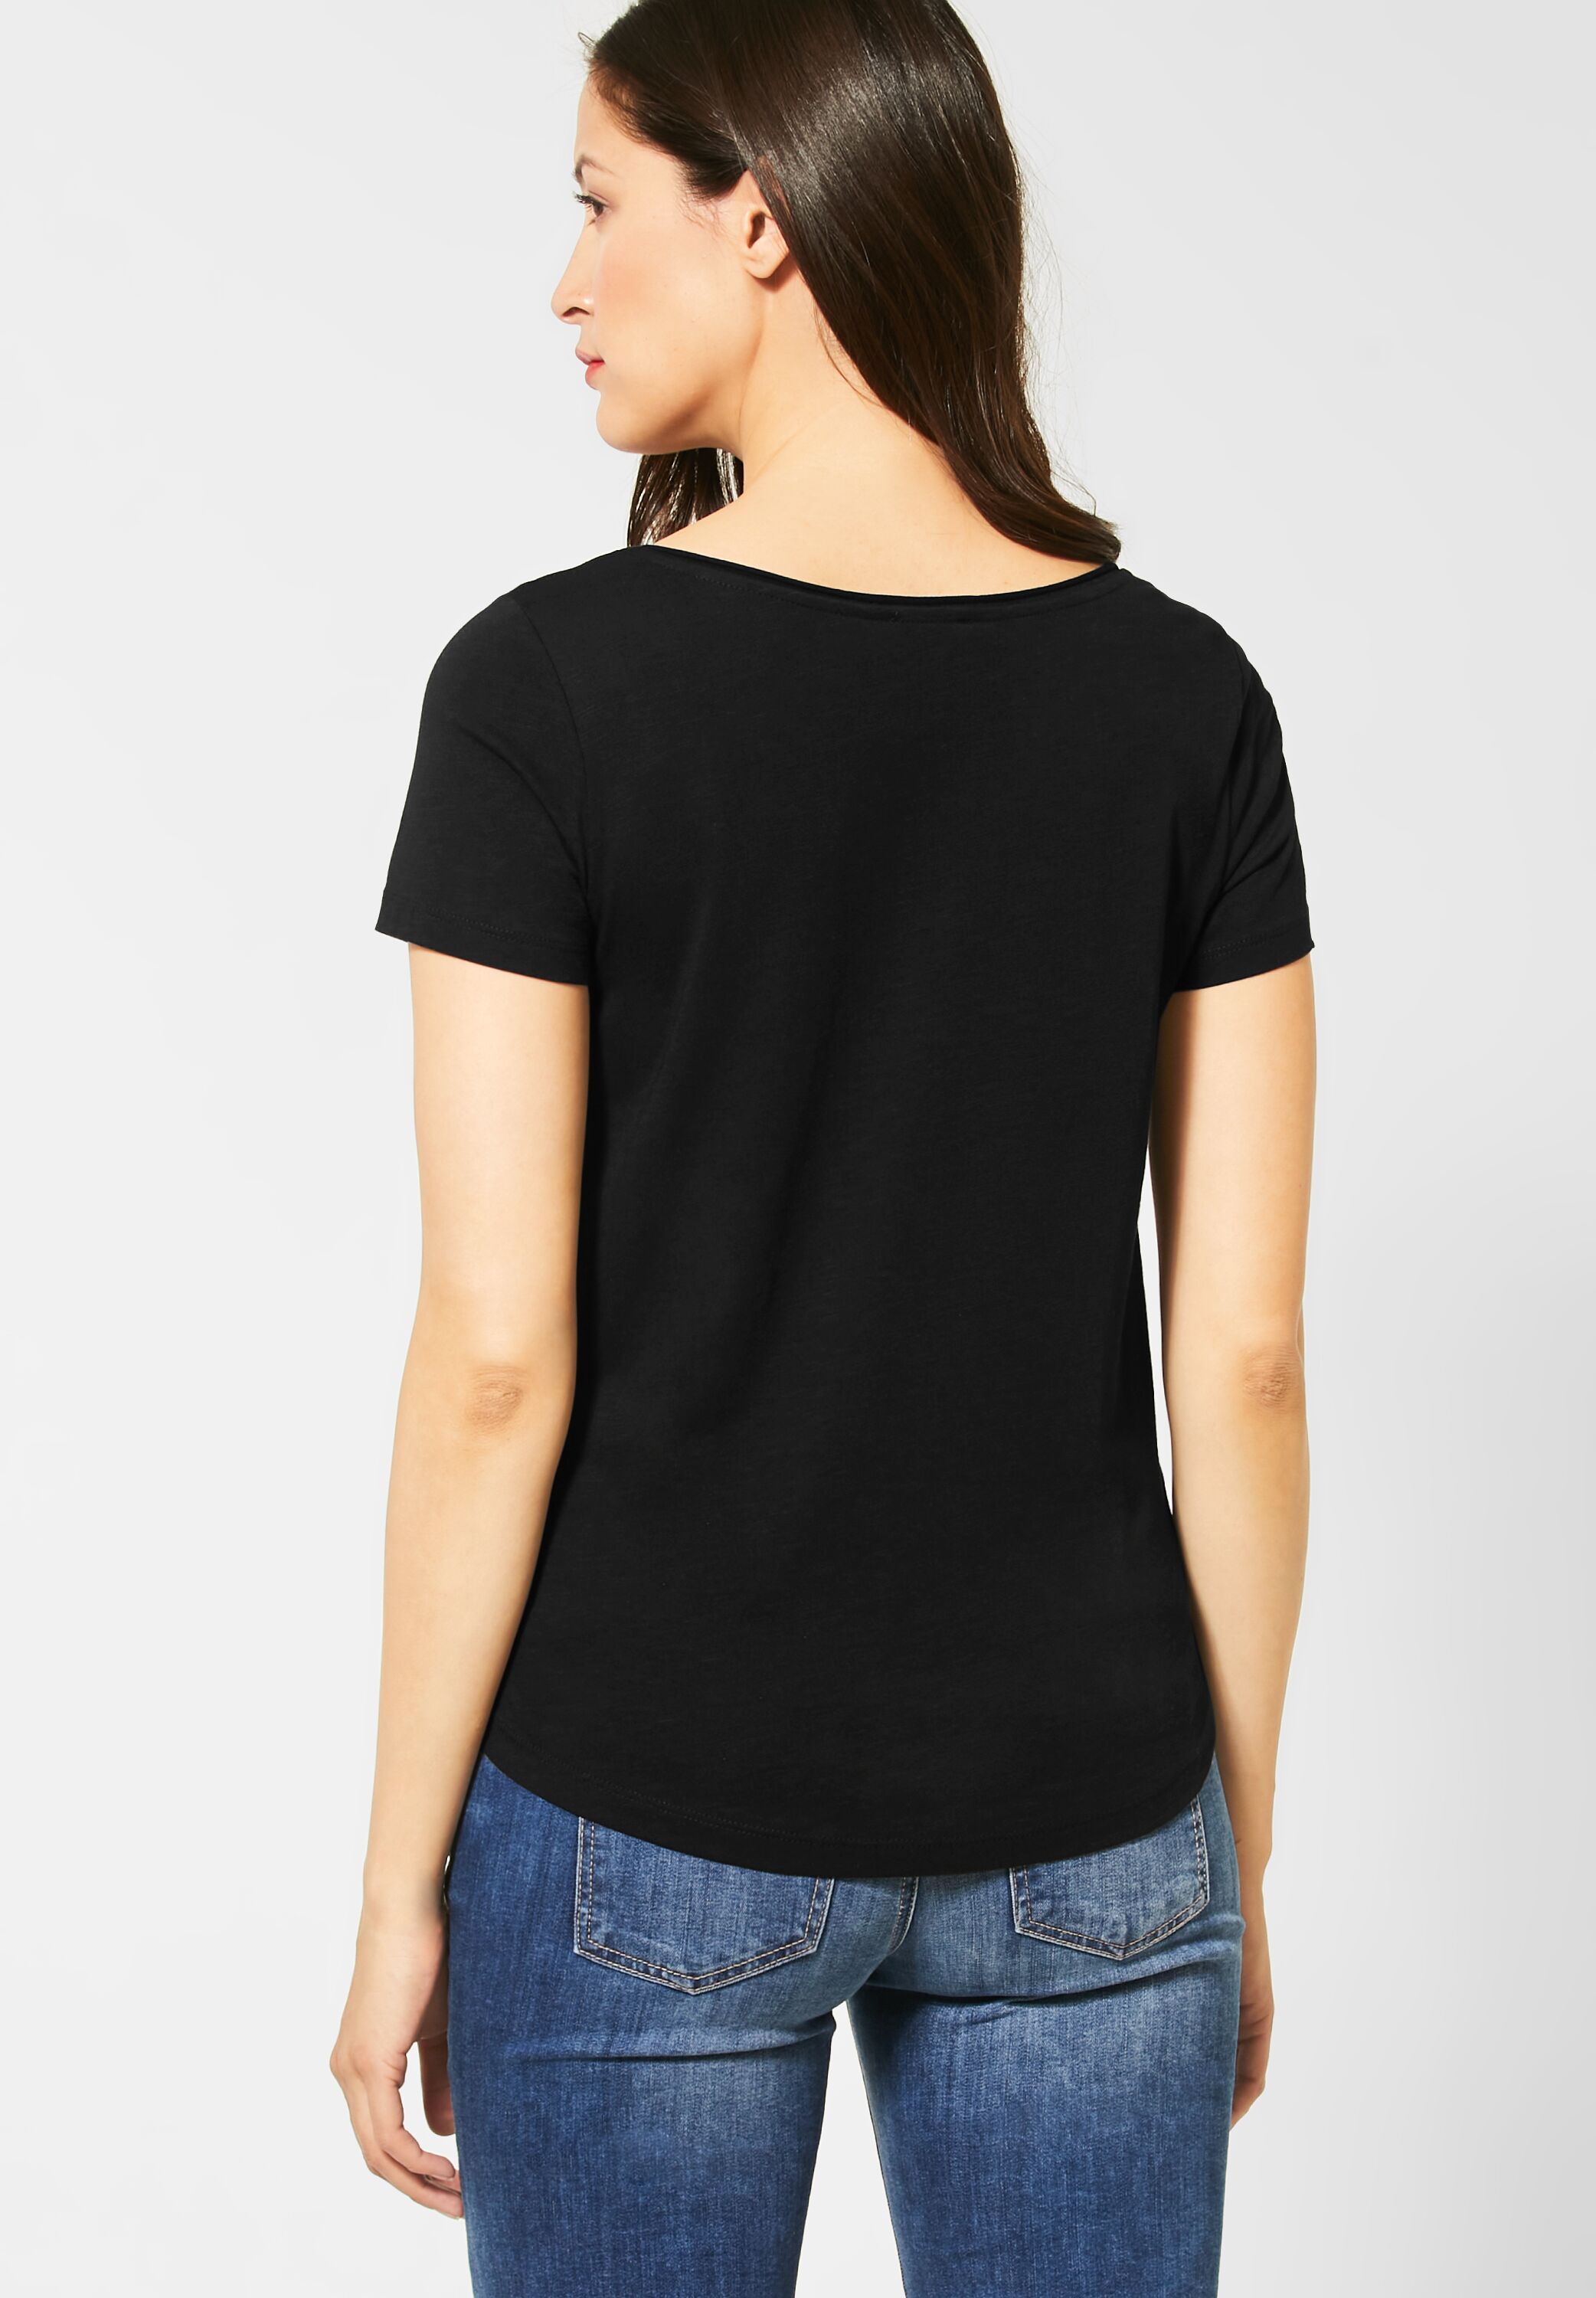 Street One T-Shirt Crista in CONCEPT Mode A314797-10001 - Black